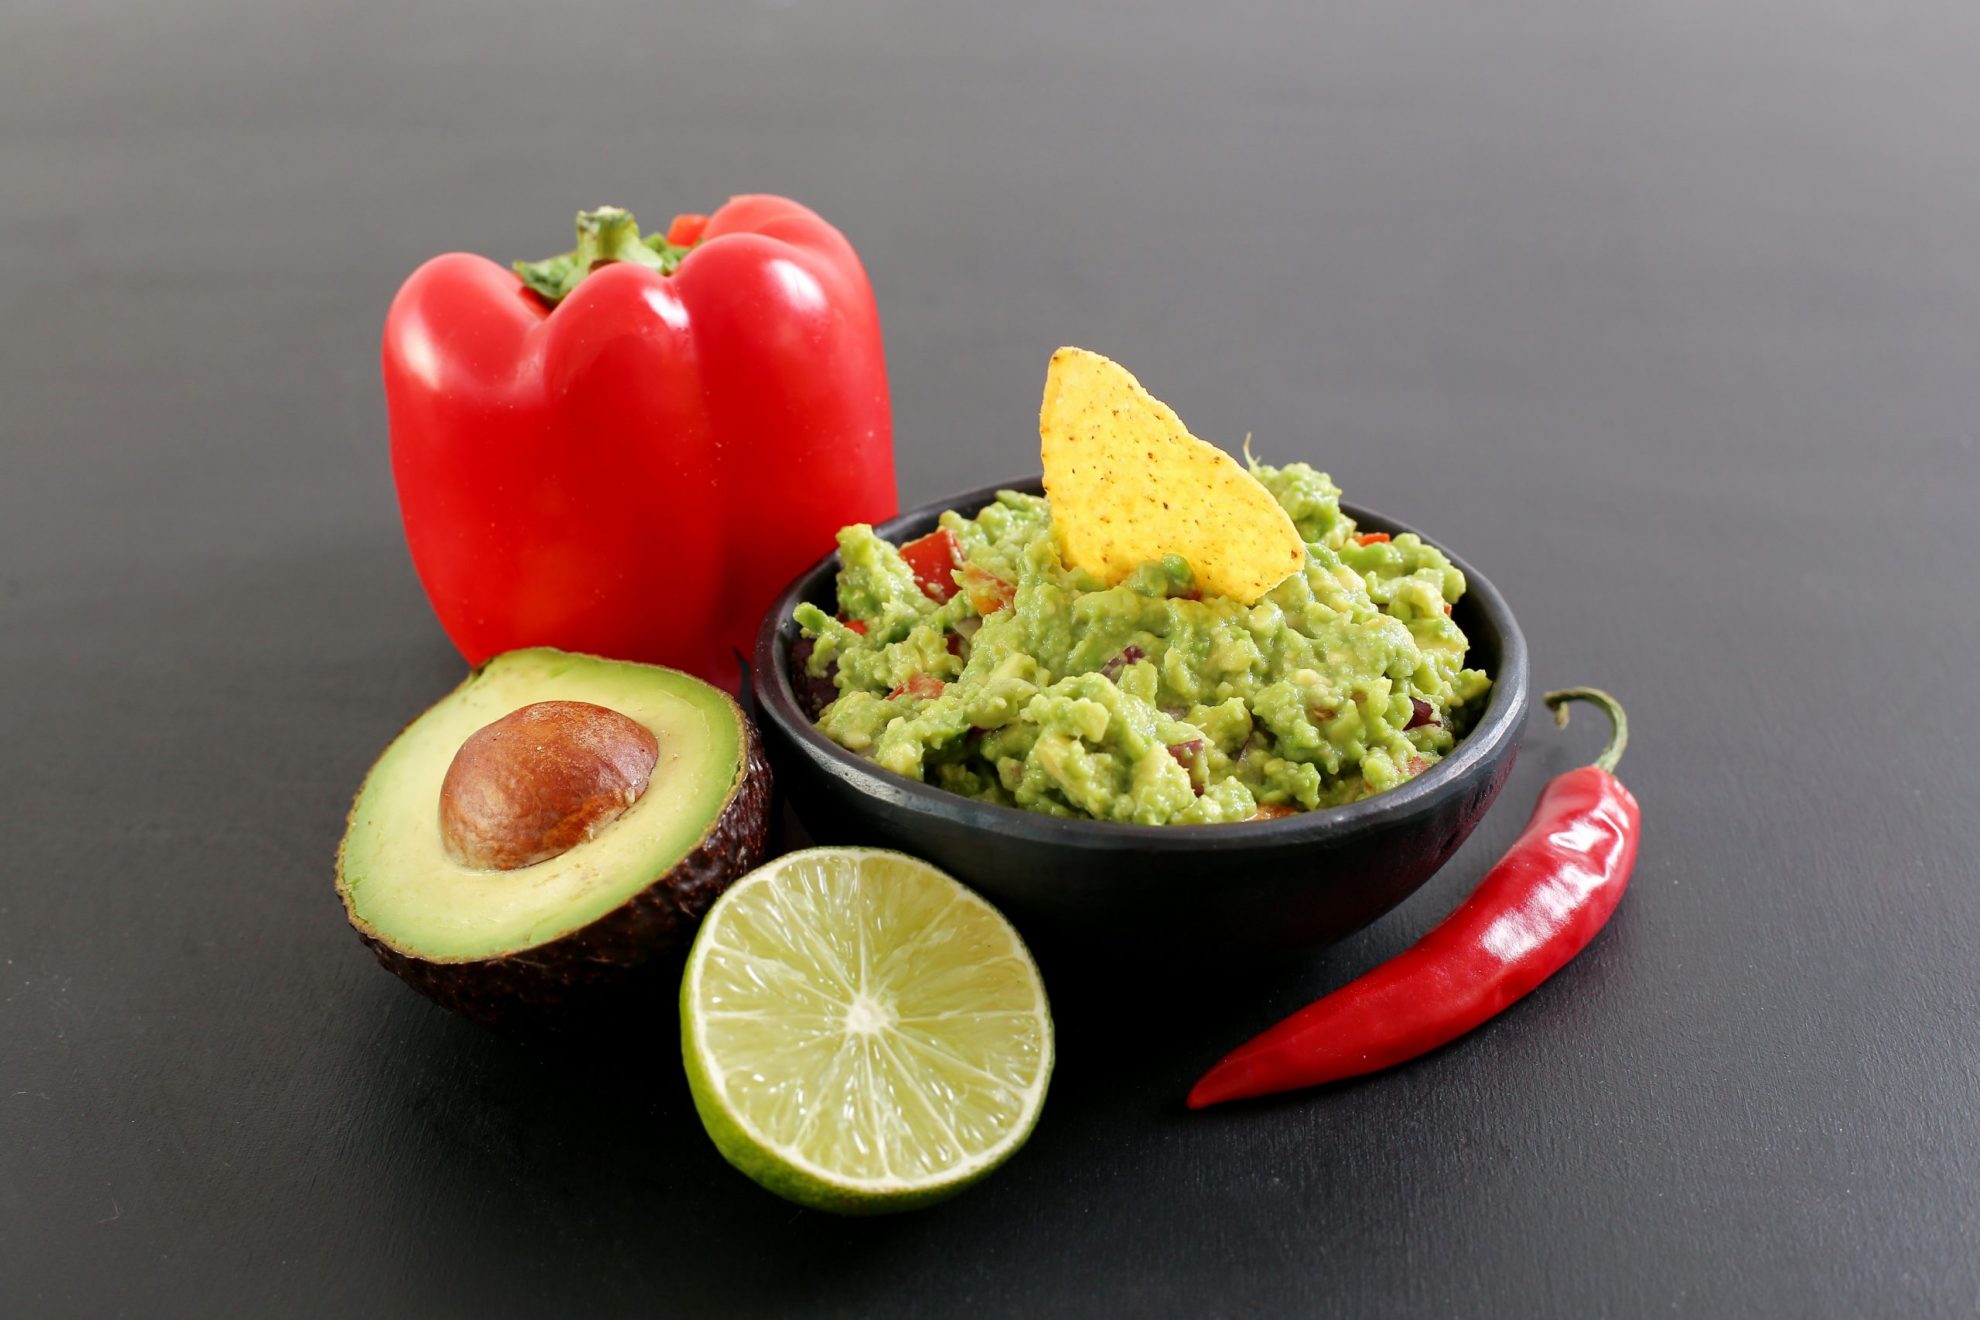 Who Really Invented Guacamole?